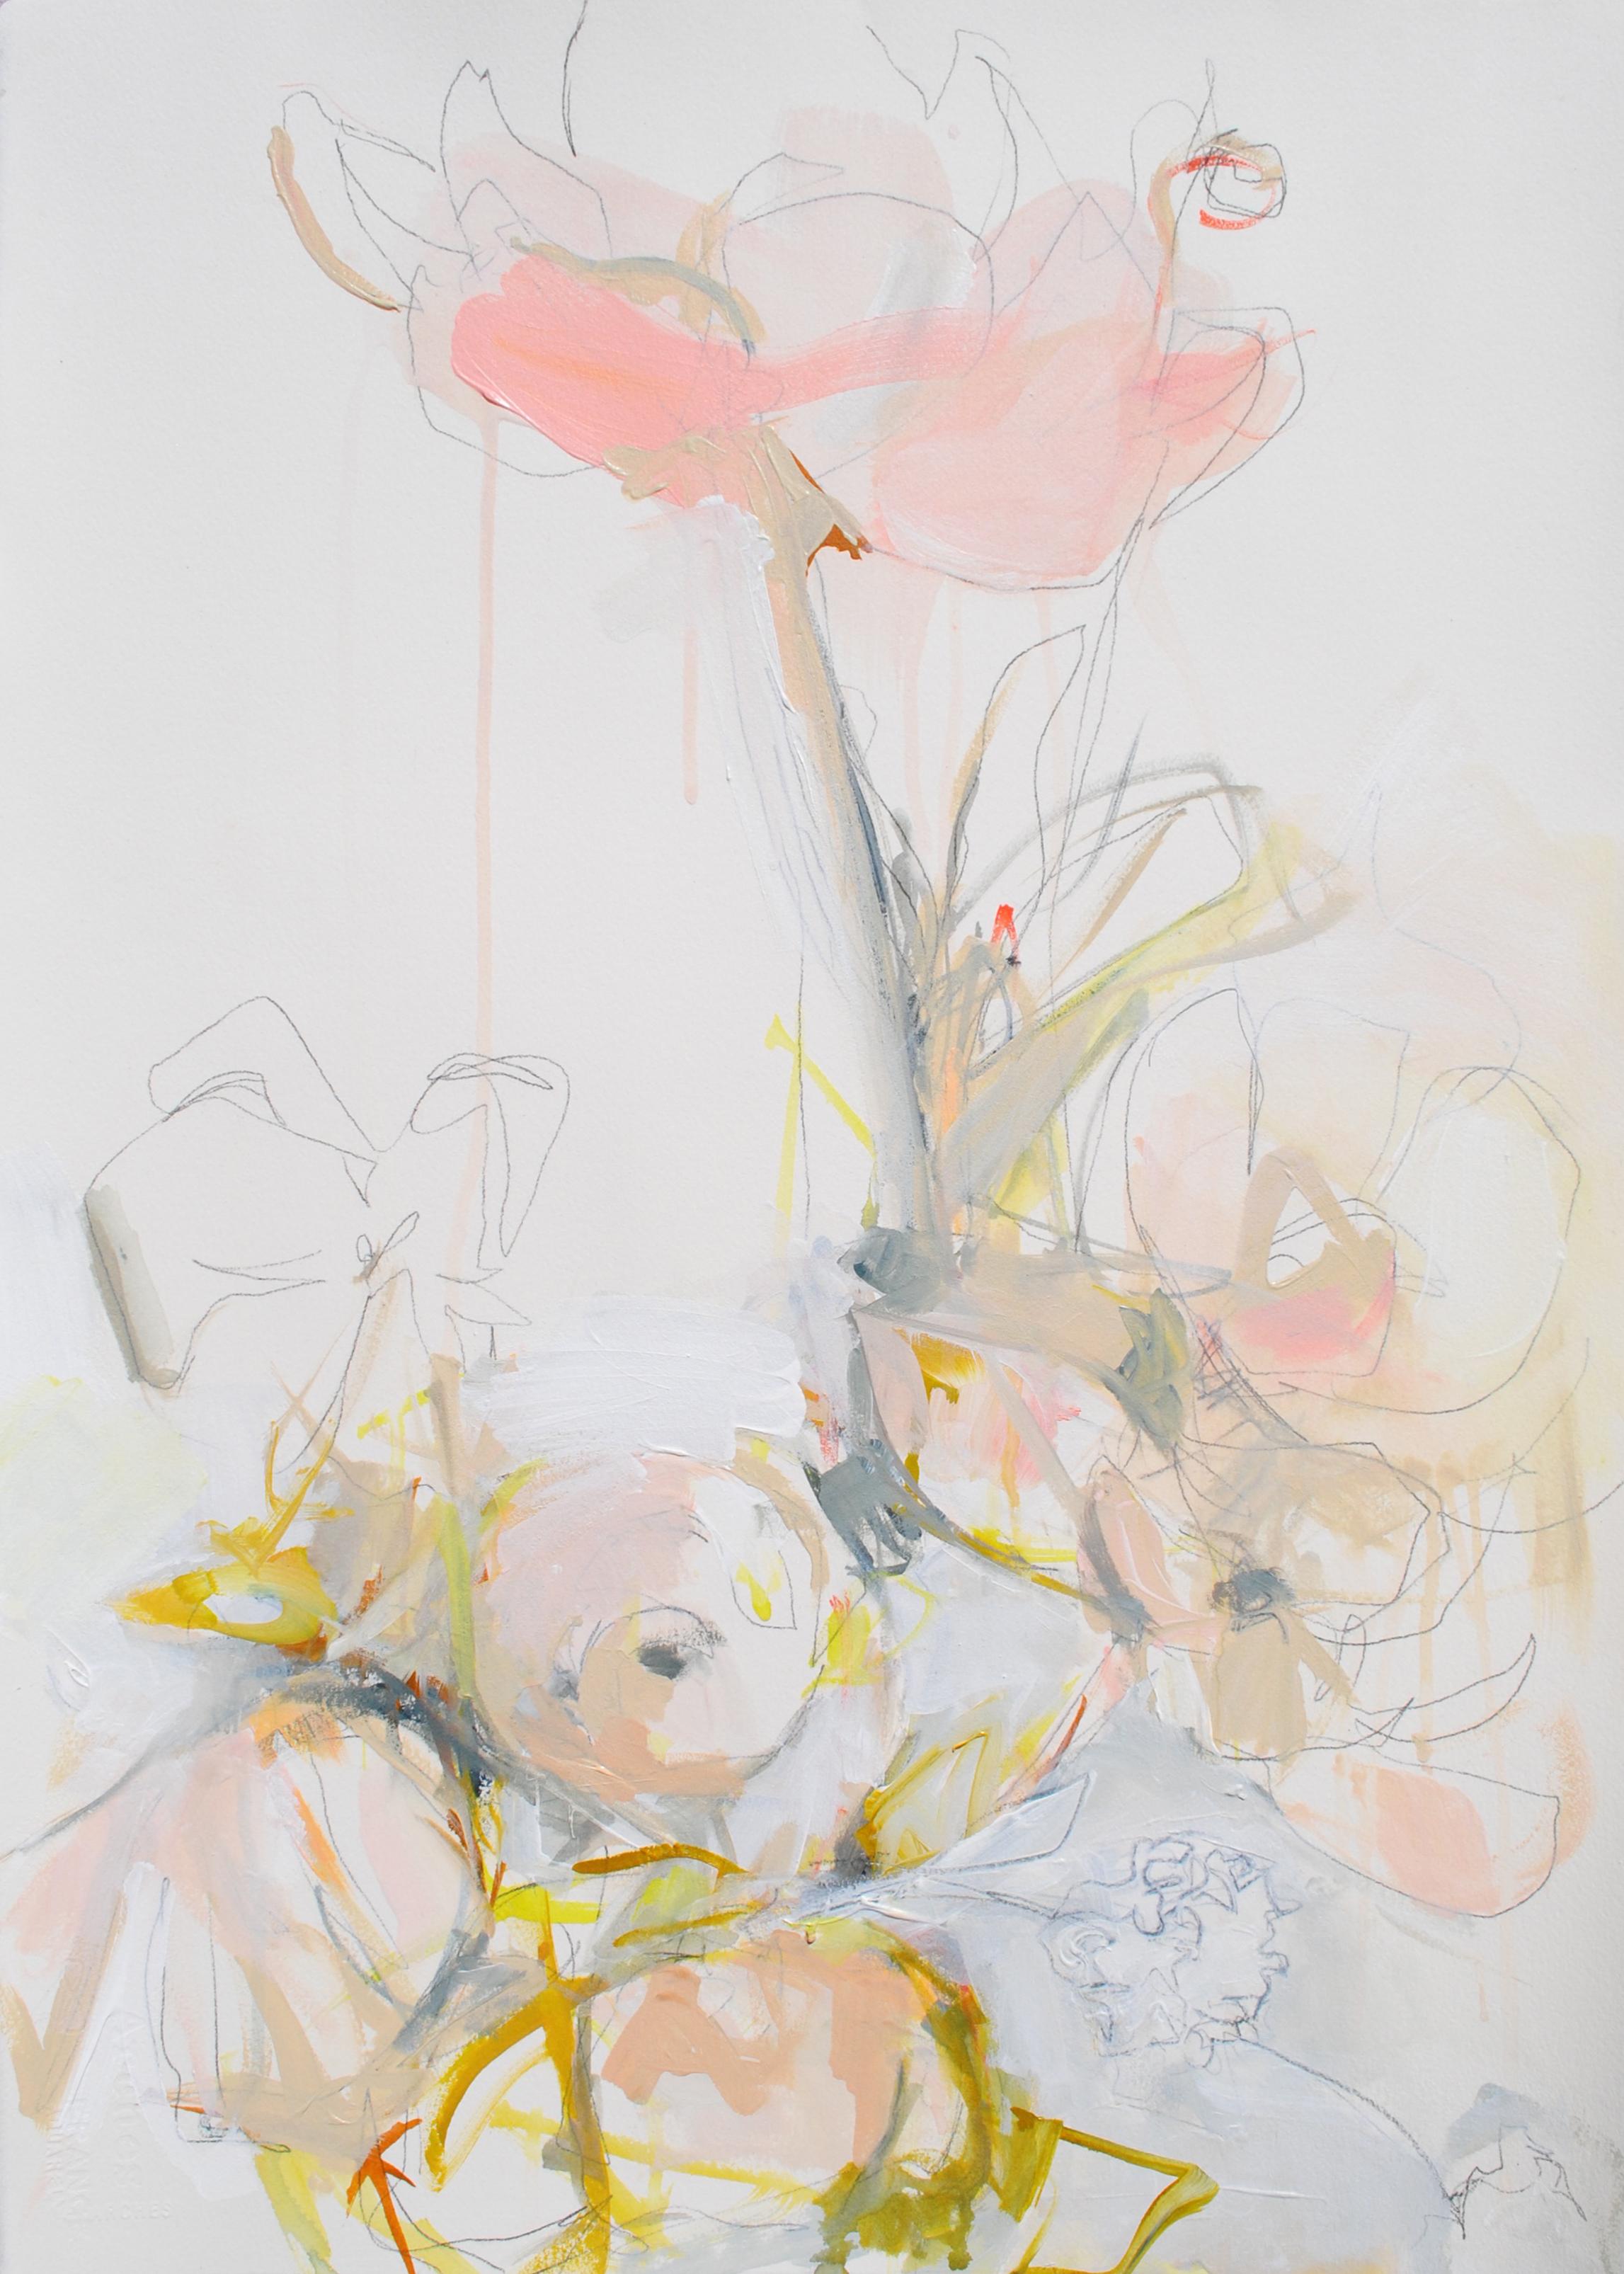 'Above All Else' is a medium size framed abstract floral mixed media on paper piece, created by American artist Kelley B. Ogburn in 2019. Featuring a soft palette mixing soft pink, grey and yellow tones, the painting is an abstracted depiction of a